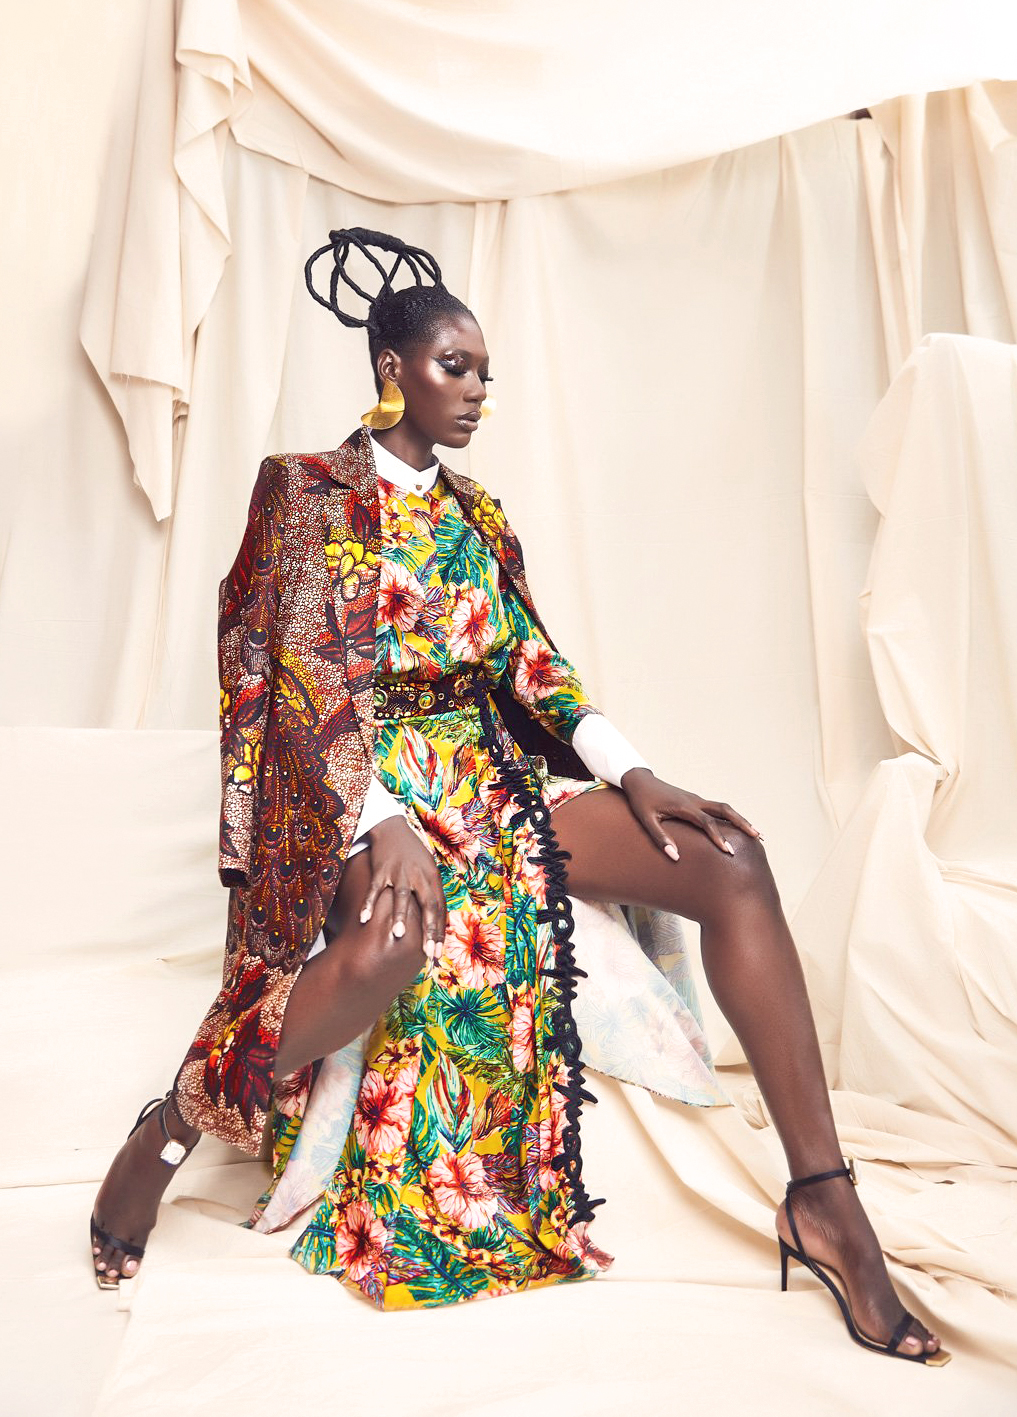 AFRICAN FASHION STYLE MAGAZINE - She is King AW19 by Christie Brown  - Look book with  Koro Amy International Model from Ivory Coast - Photographer DAN NGU - Media Partner DN AFRICA - STUDIO 24 NIGERIA - STUDIO 24 INTERNATIONAL - Ifeanyi Christopher Oputa MD AND CEO OF COLVI LIMITED AND STUDIO 24 - CHEVEUX CHERIE and CHEVEUX CHERIE STUDIO BY MARIEME DUBOZ- Fashion Editor Nahomie NOOR COULIBALY